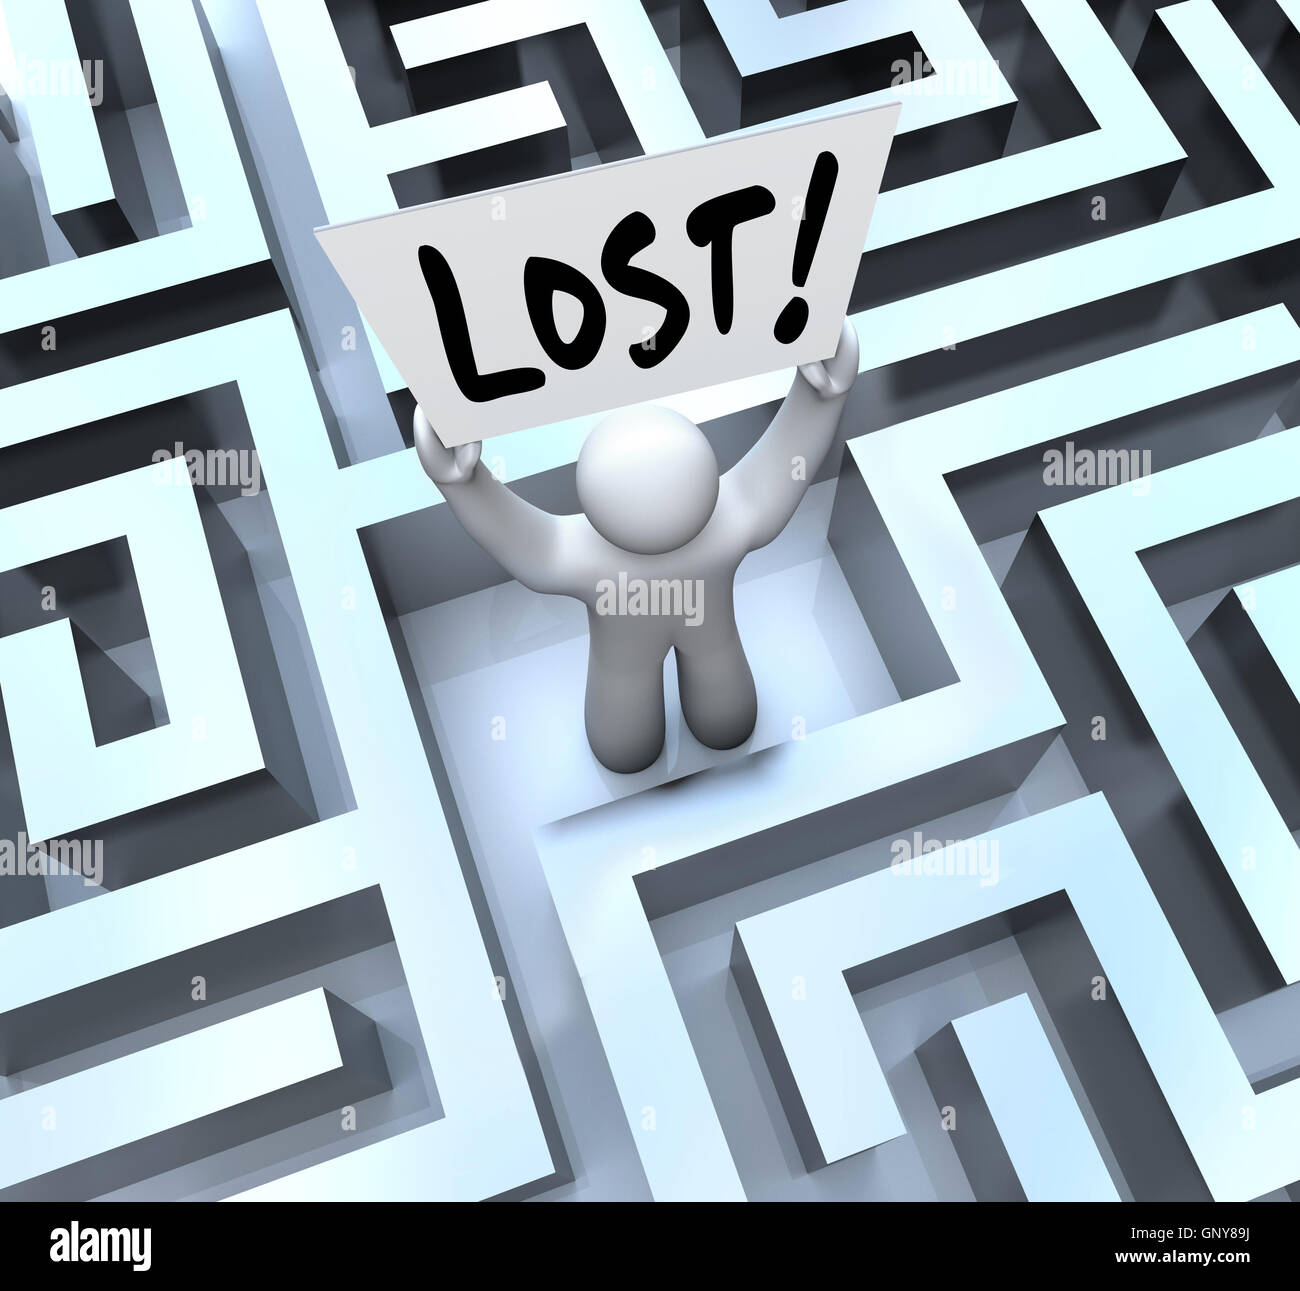 Lost Man Holding Sign in Labyrinth Maze Stock Photo